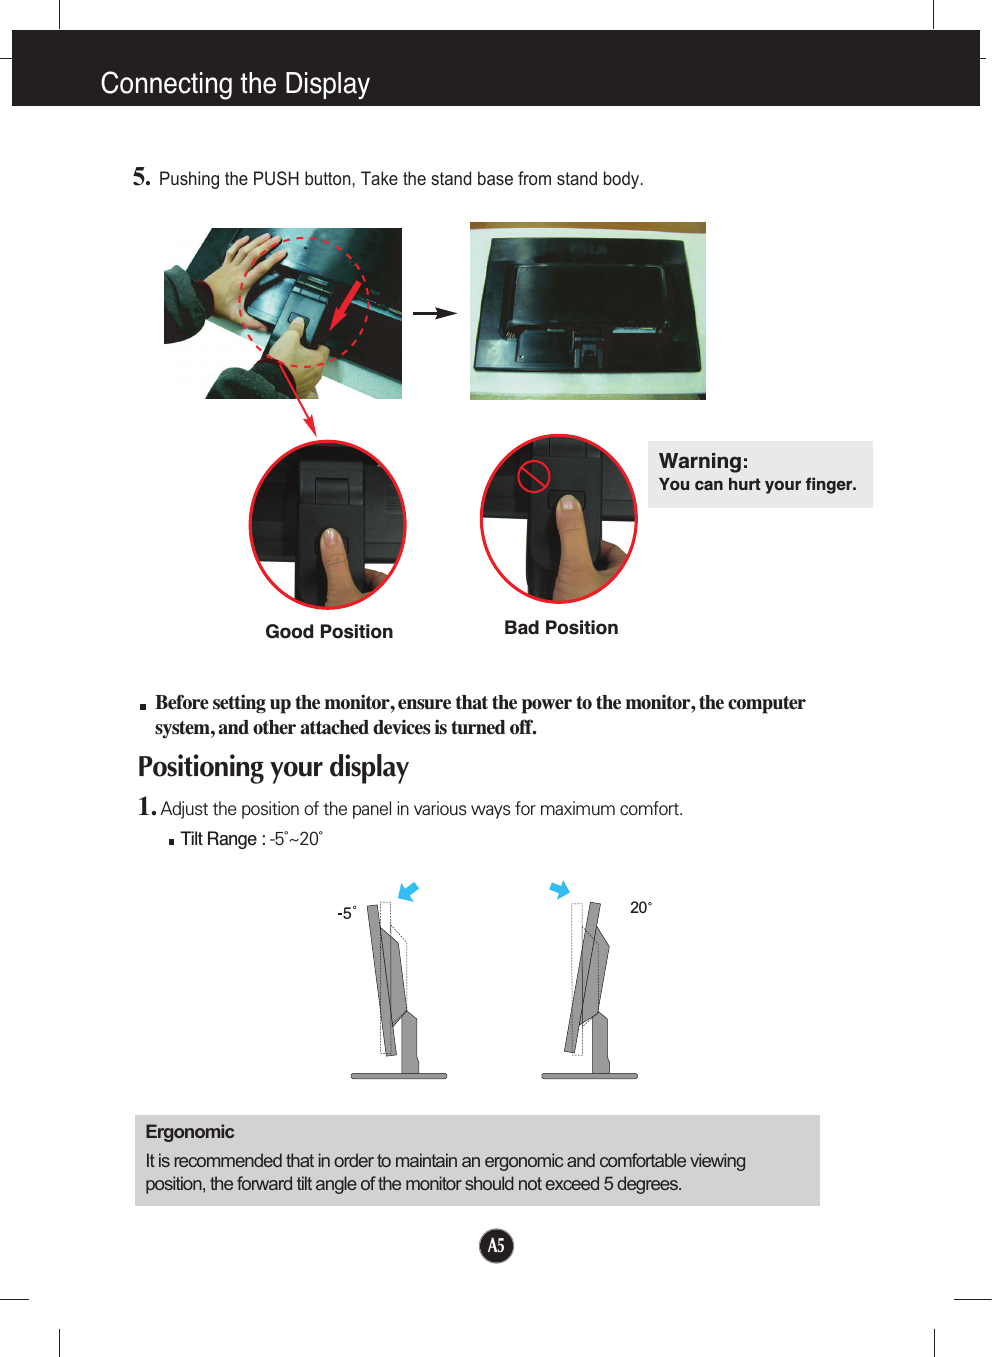 A5Connecting the Display20Before setting up the monitor, ensure that the power to the monitor, the computersystem, and other attached devices is turned off. Positioning your display1. Adjust the position of the panel in various ways for maximum comfort.Tilt Range : -5˚~20˚                            ErgonomicIt is recommended that in order to maintain an ergonomic and comfortable viewingposition, the forward tilt angle of the monitor should not exceed 5 degrees.5.Pushing the PUSH button, Take the stand base from stand body.Warning:You can hurt your finger.Bad PositionGood Position